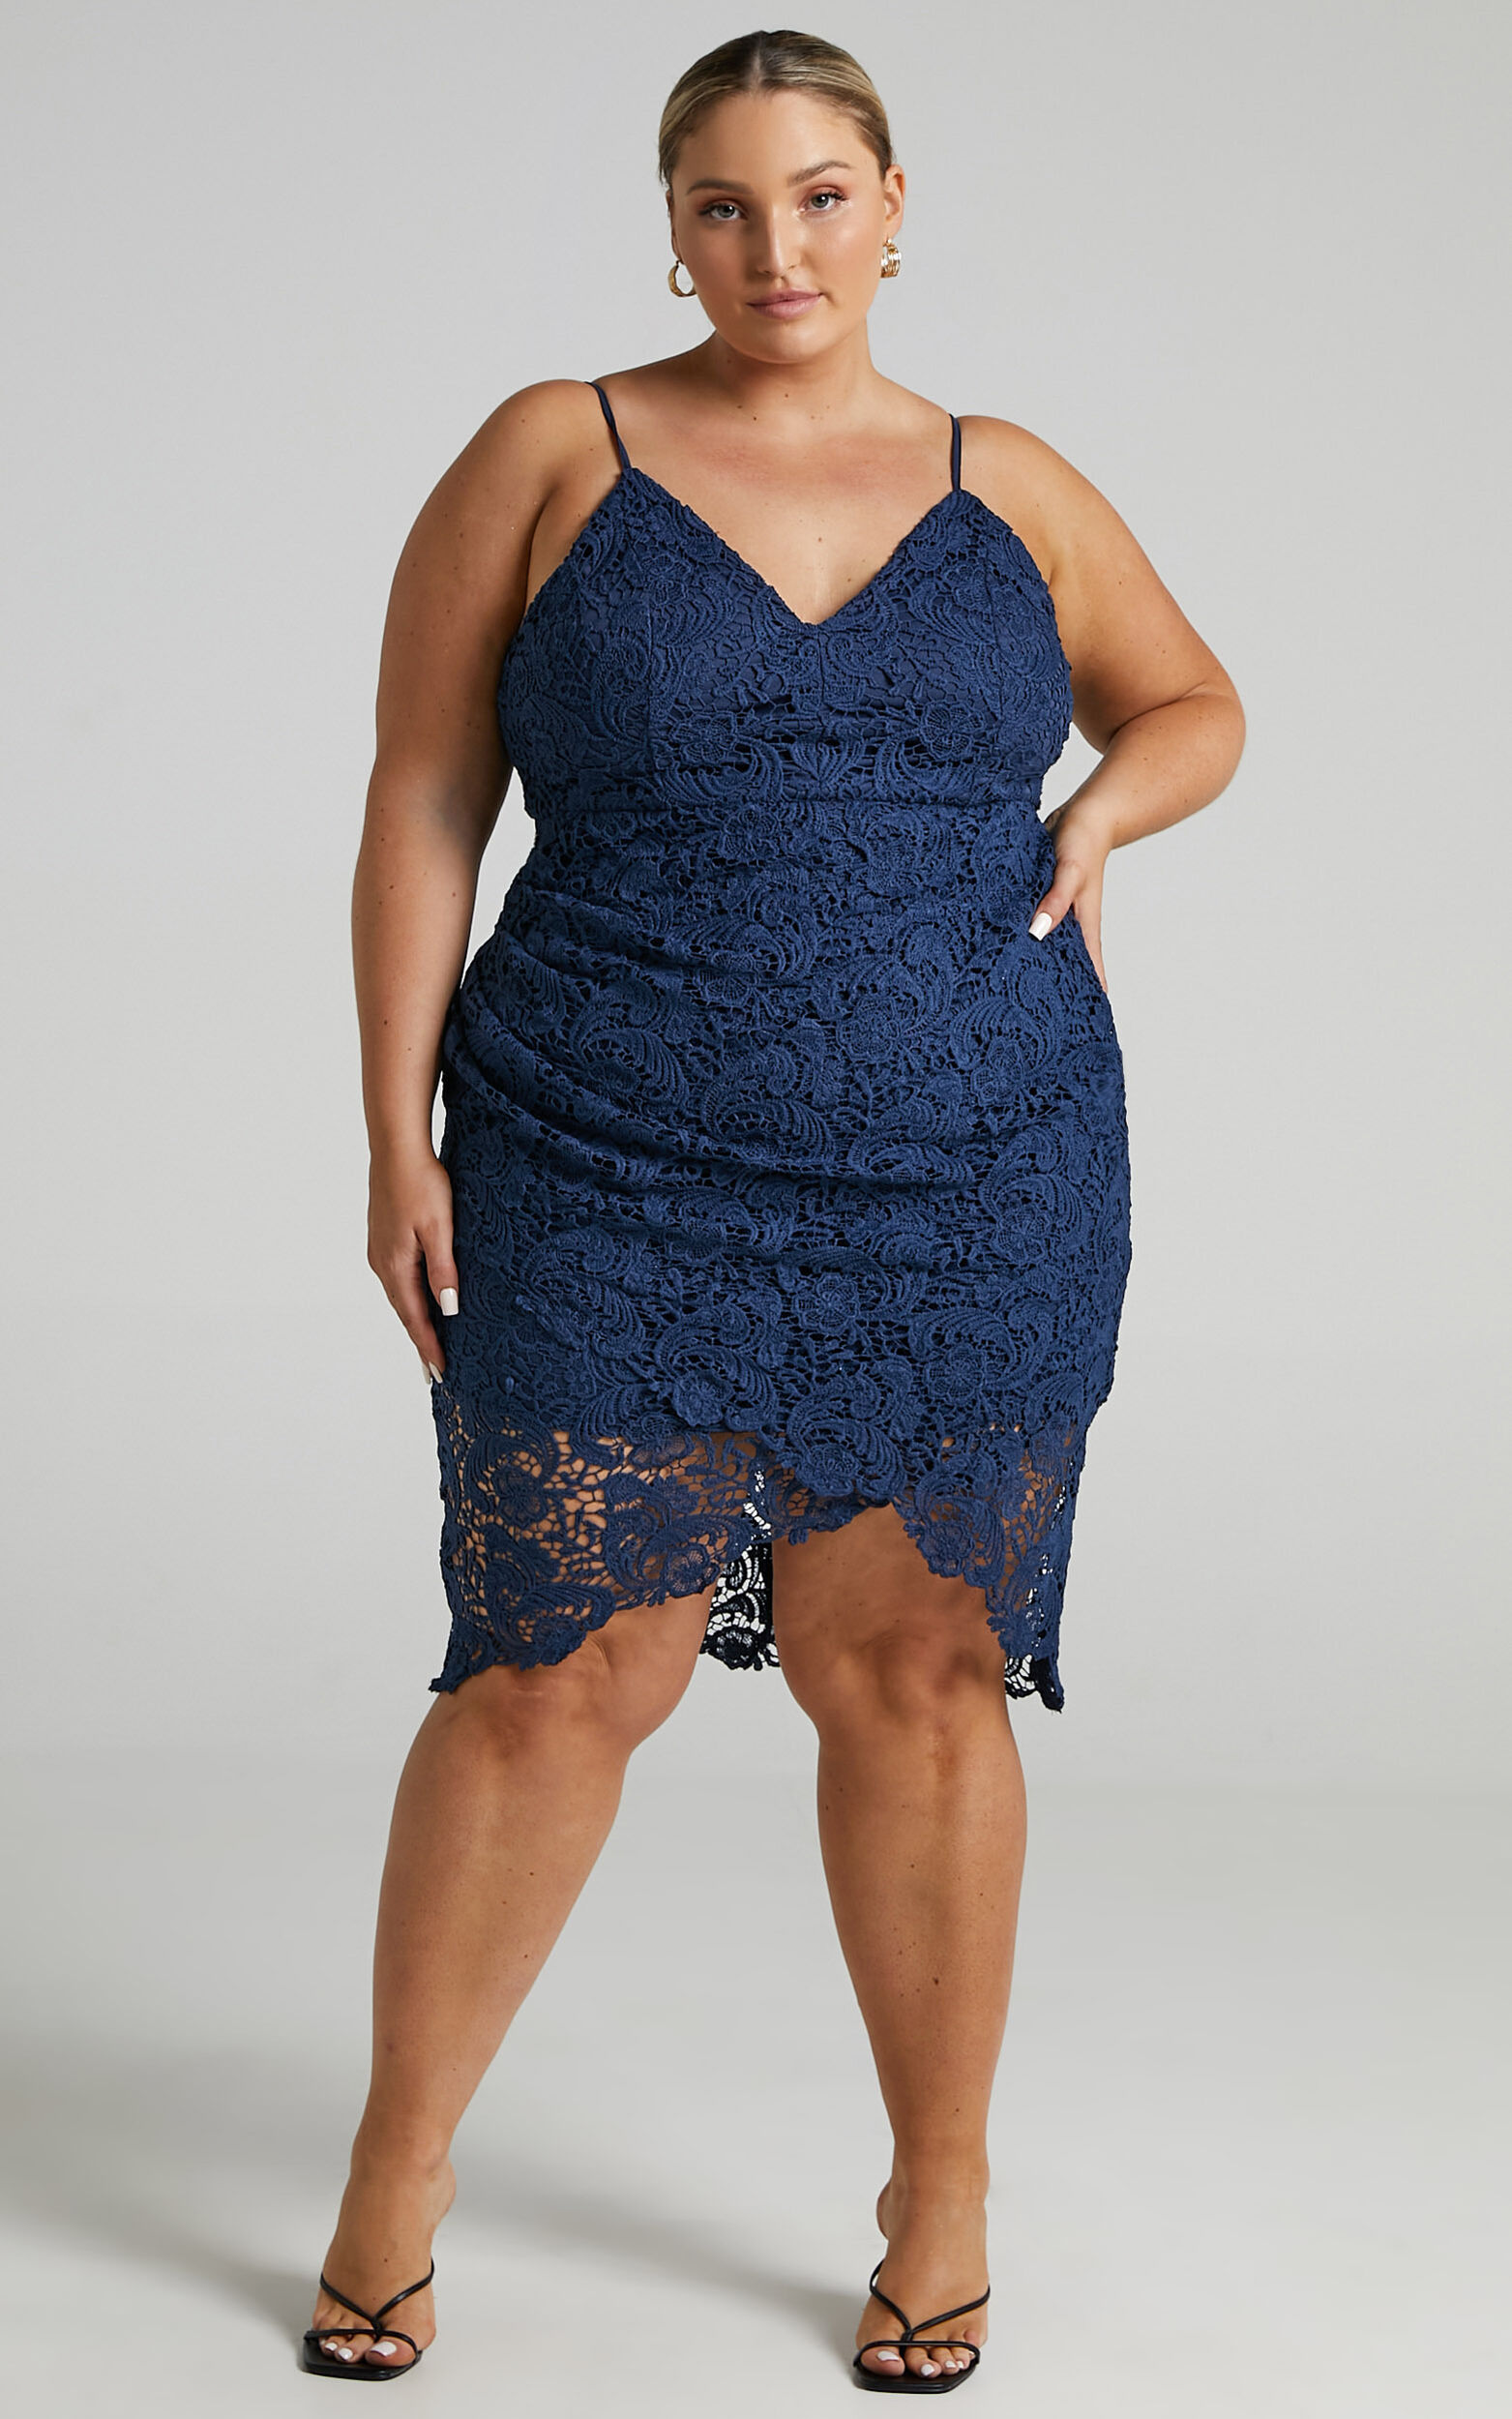 Typical Lover Dress in Navy Lace - 04, NVY4